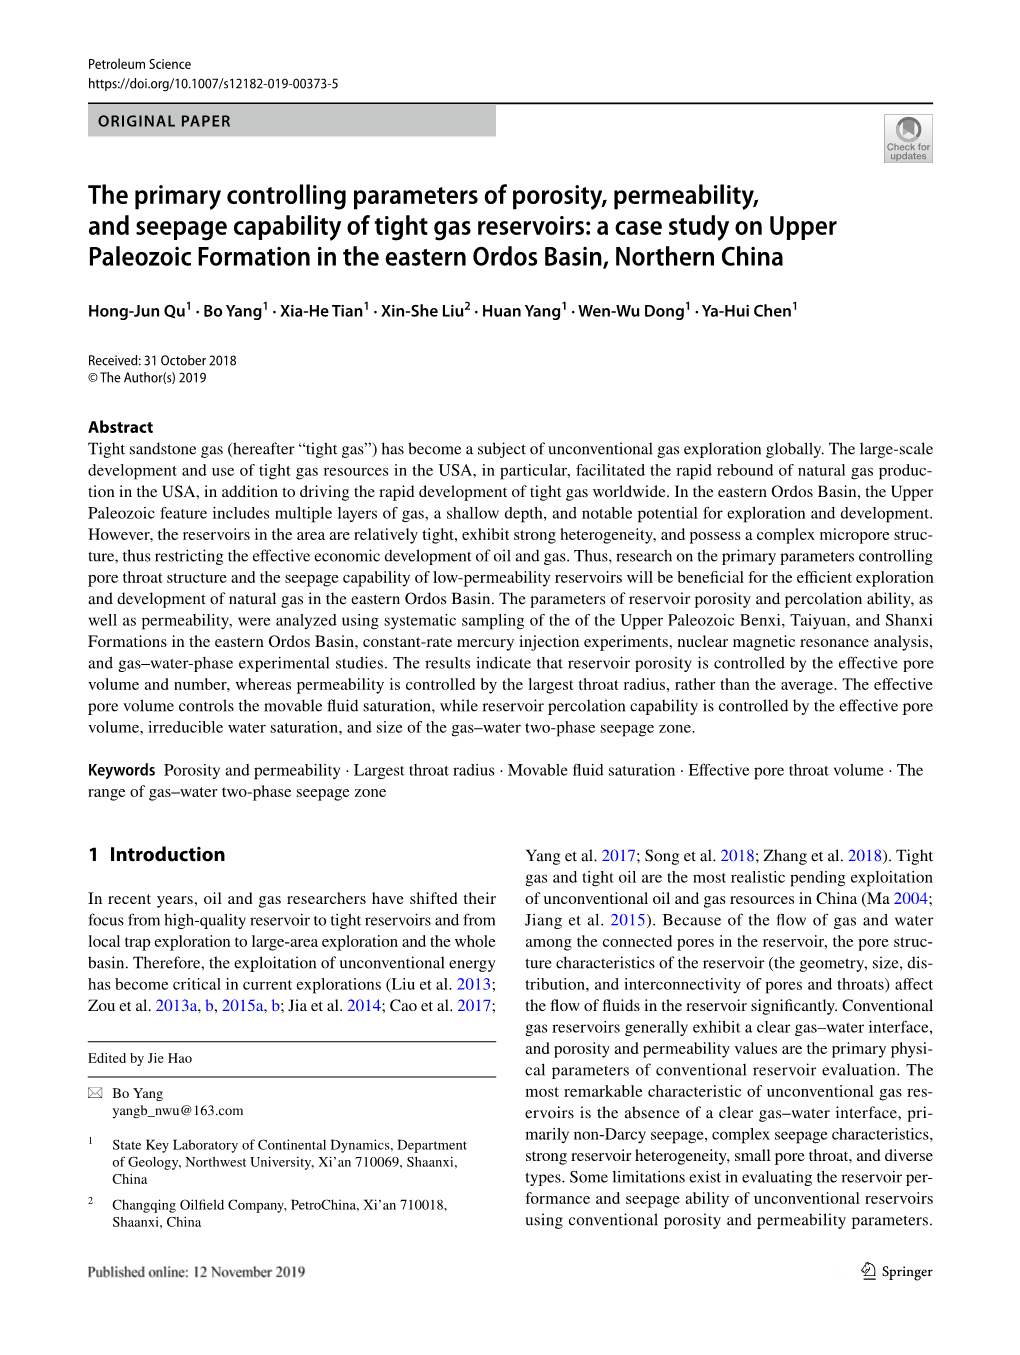 The Primary Controlling Parameters of Porosity, Permeability, and Seepage